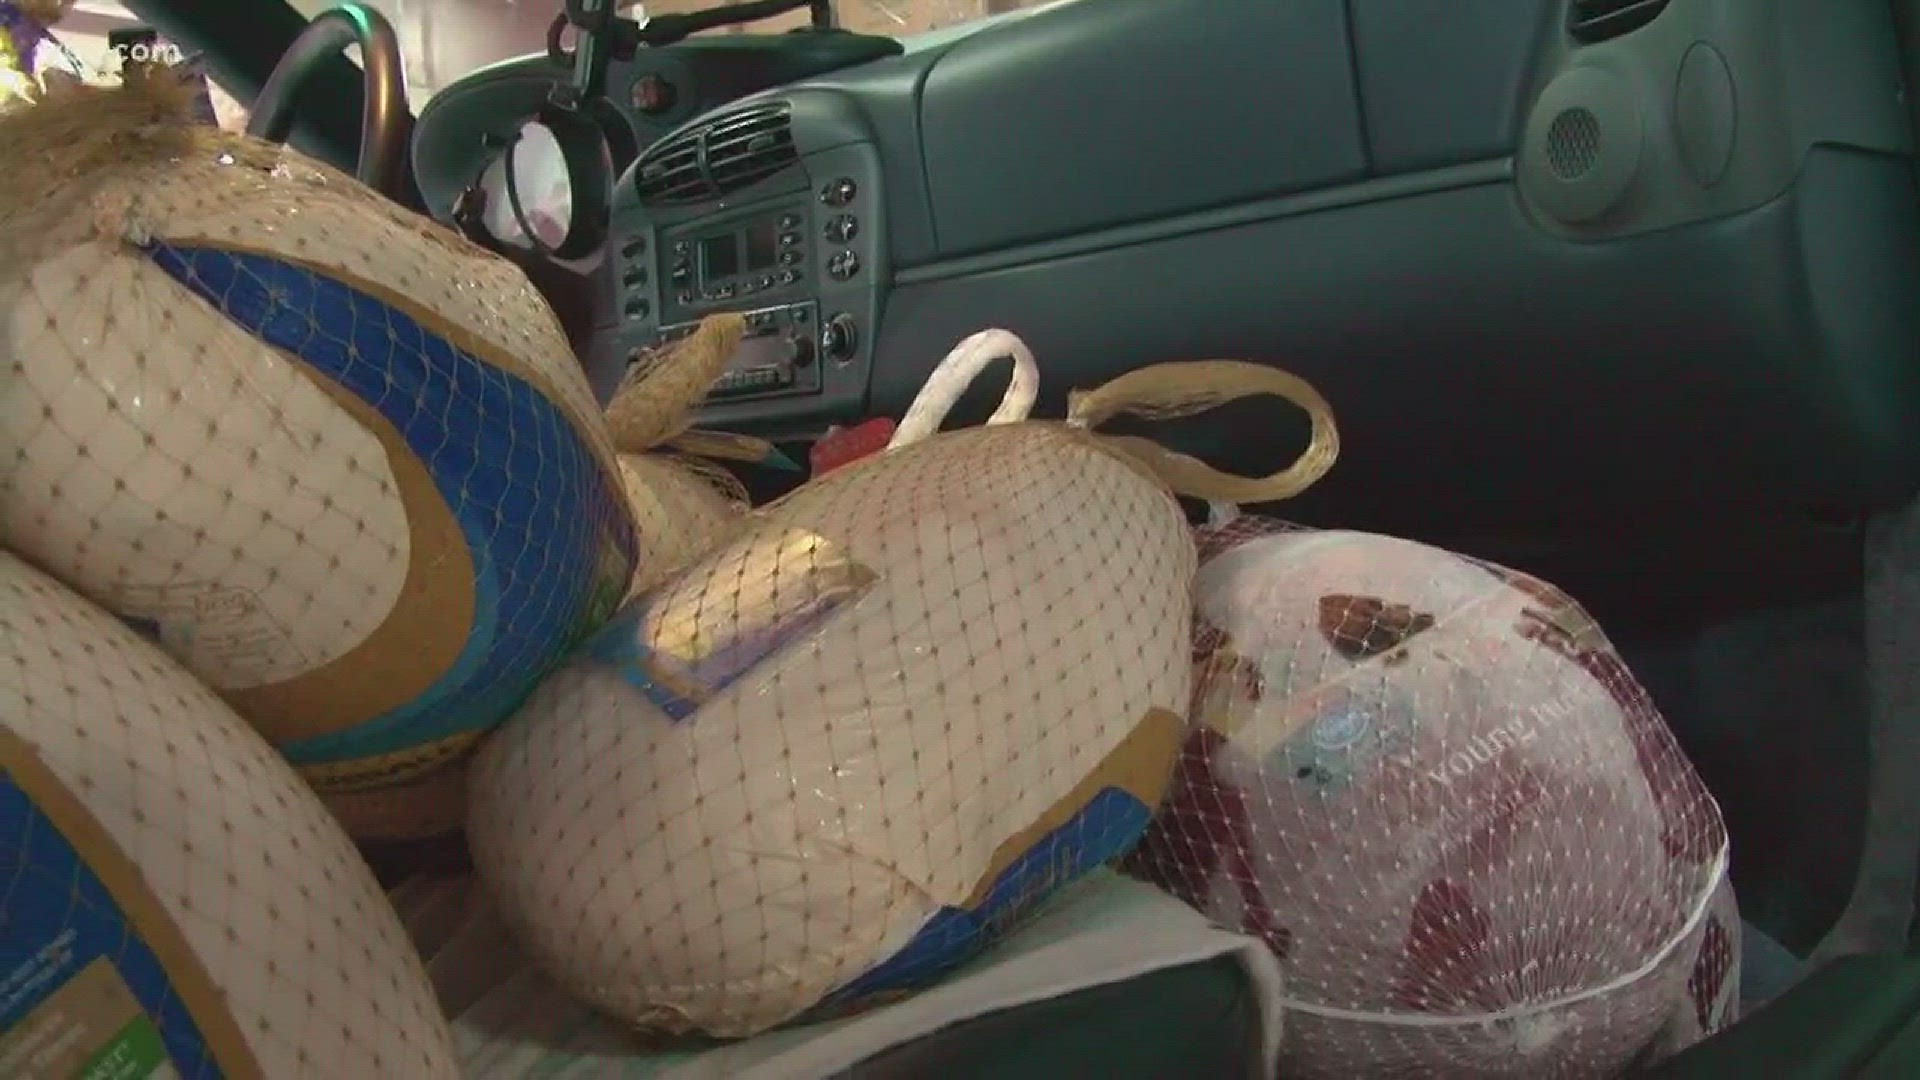 The Porche Club of America hosted their first ever "Turkeys in the Trunk" Saturday afternoon to help give the needy a great Thanksgiving.